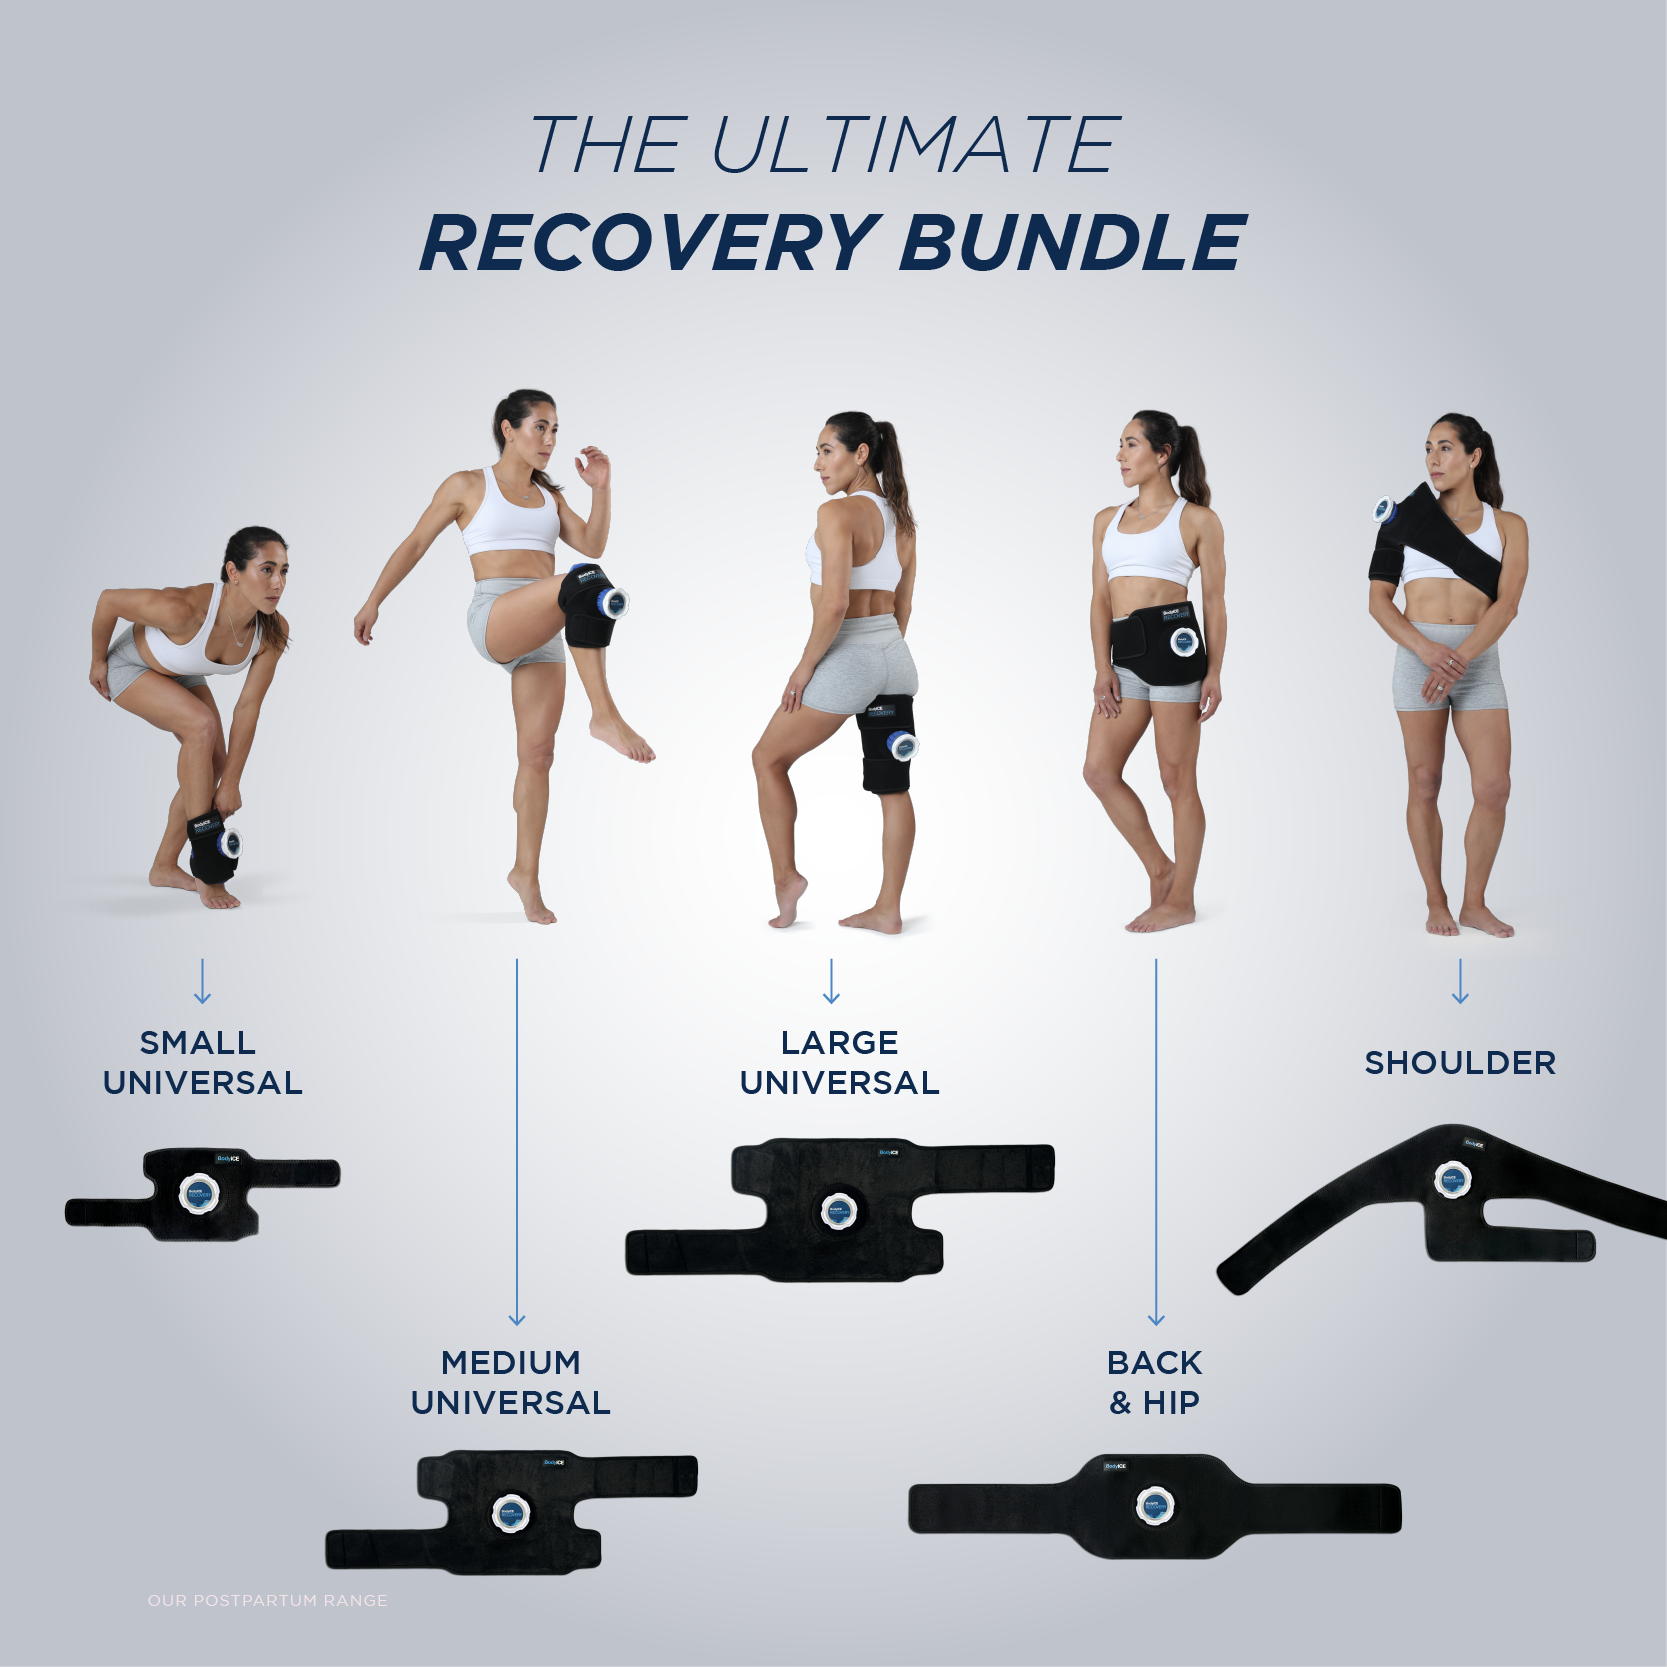 The Ultimate Recovery Bundle